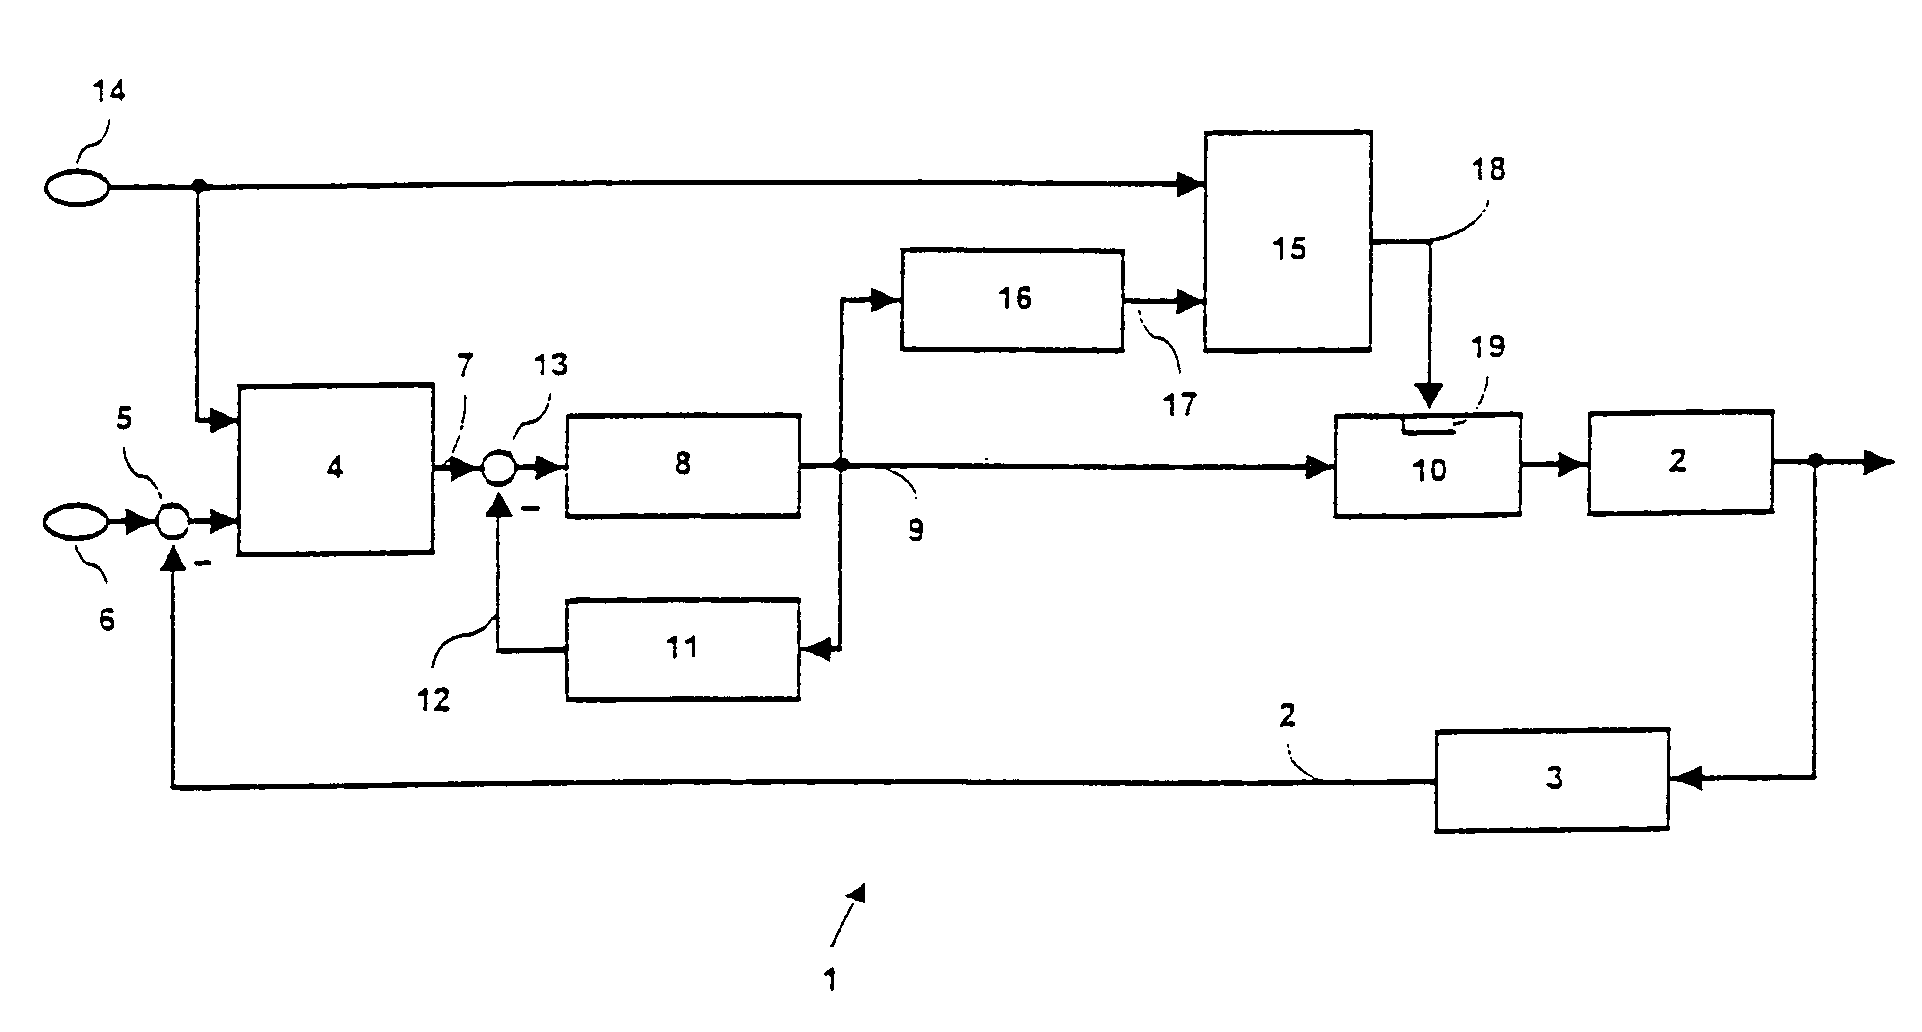 Apparatus for controlling the delivery of medical fluids